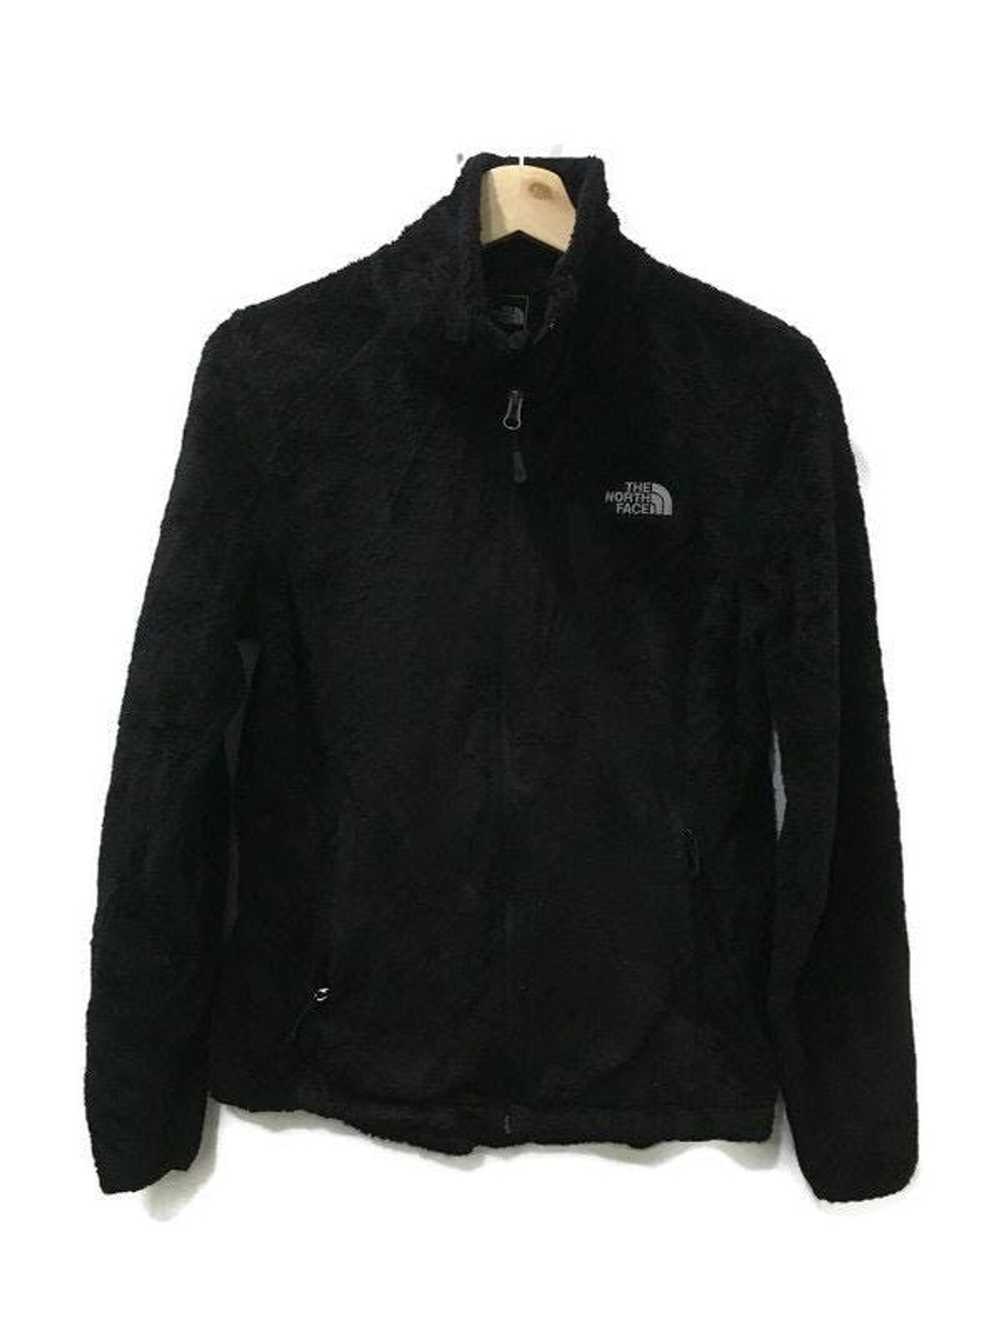 The North Face The North Face Velvet Jacket - image 1